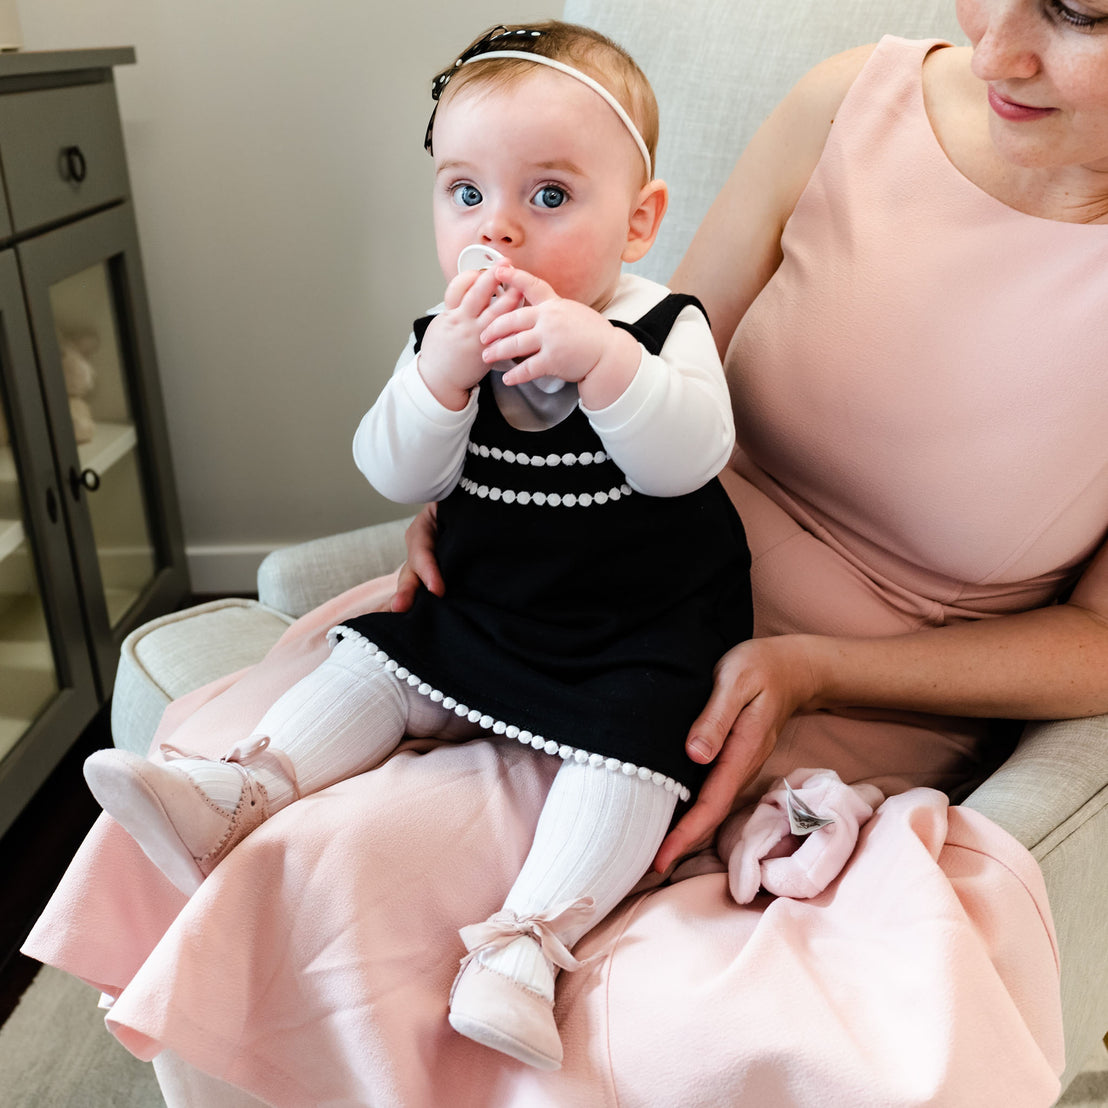 A mother in a Pink Dress sits with her baby girl on her lap. The baby, dressed in a black and white outfit with a lace headband, is biting her pacifier.